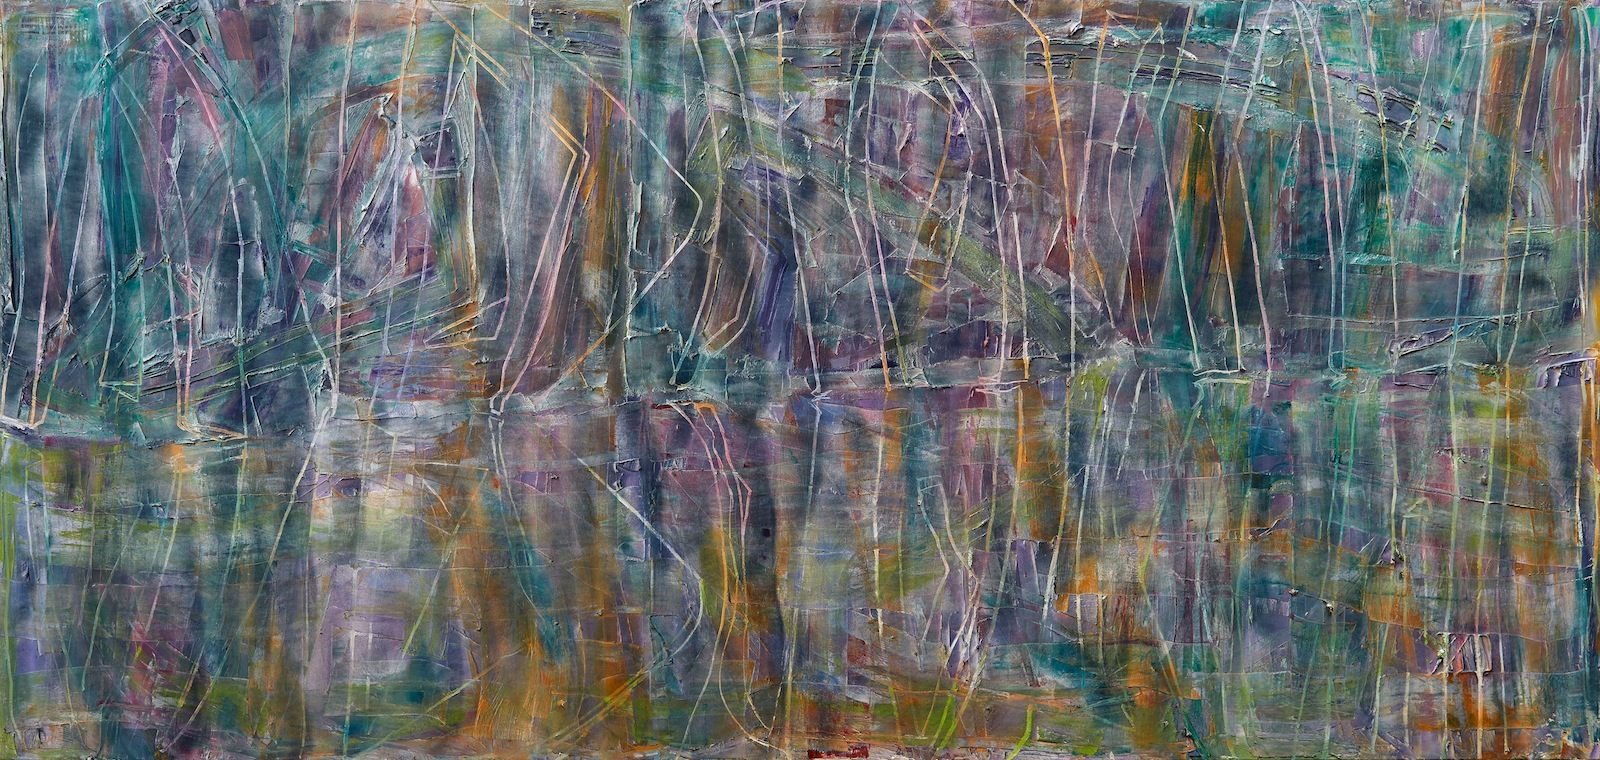 Gabriel Hartley, Skim, 2013, oil and spray paint on canvas, 94 × 165 in. (238.76 × 419.10 cm)